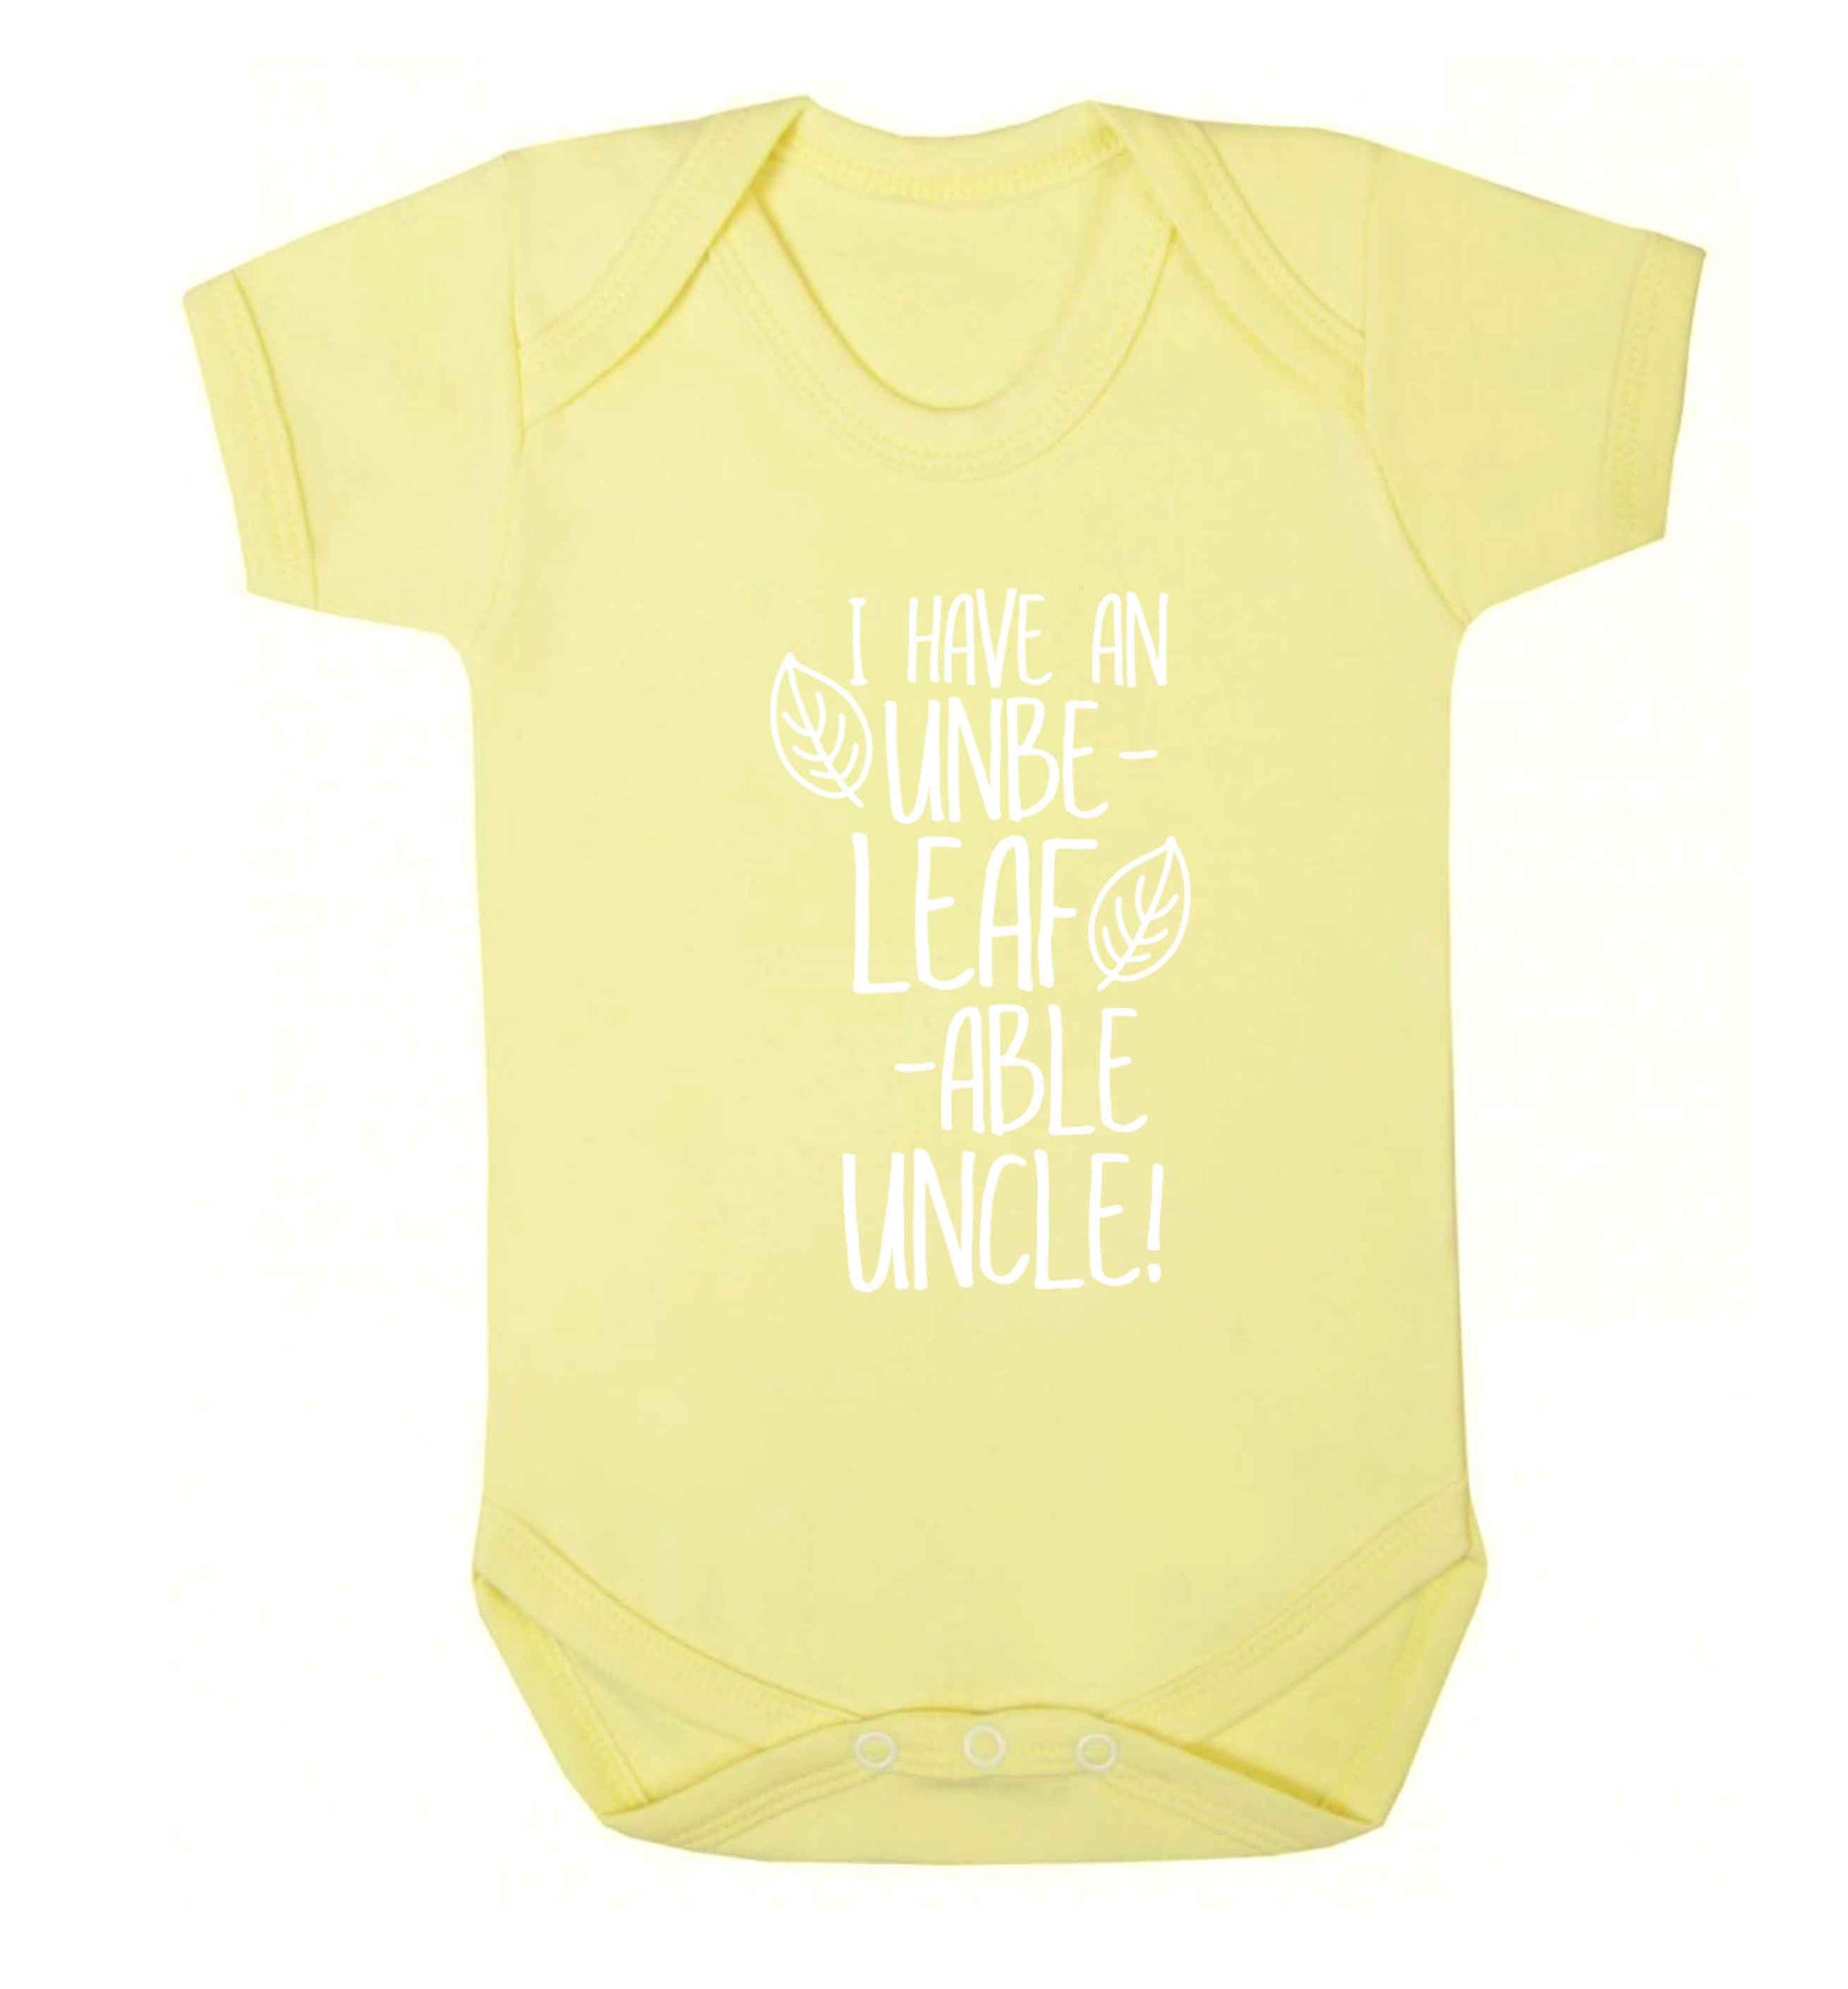 I have an unbe-leaf-able uncle Baby Vest pale yellow 18-24 months